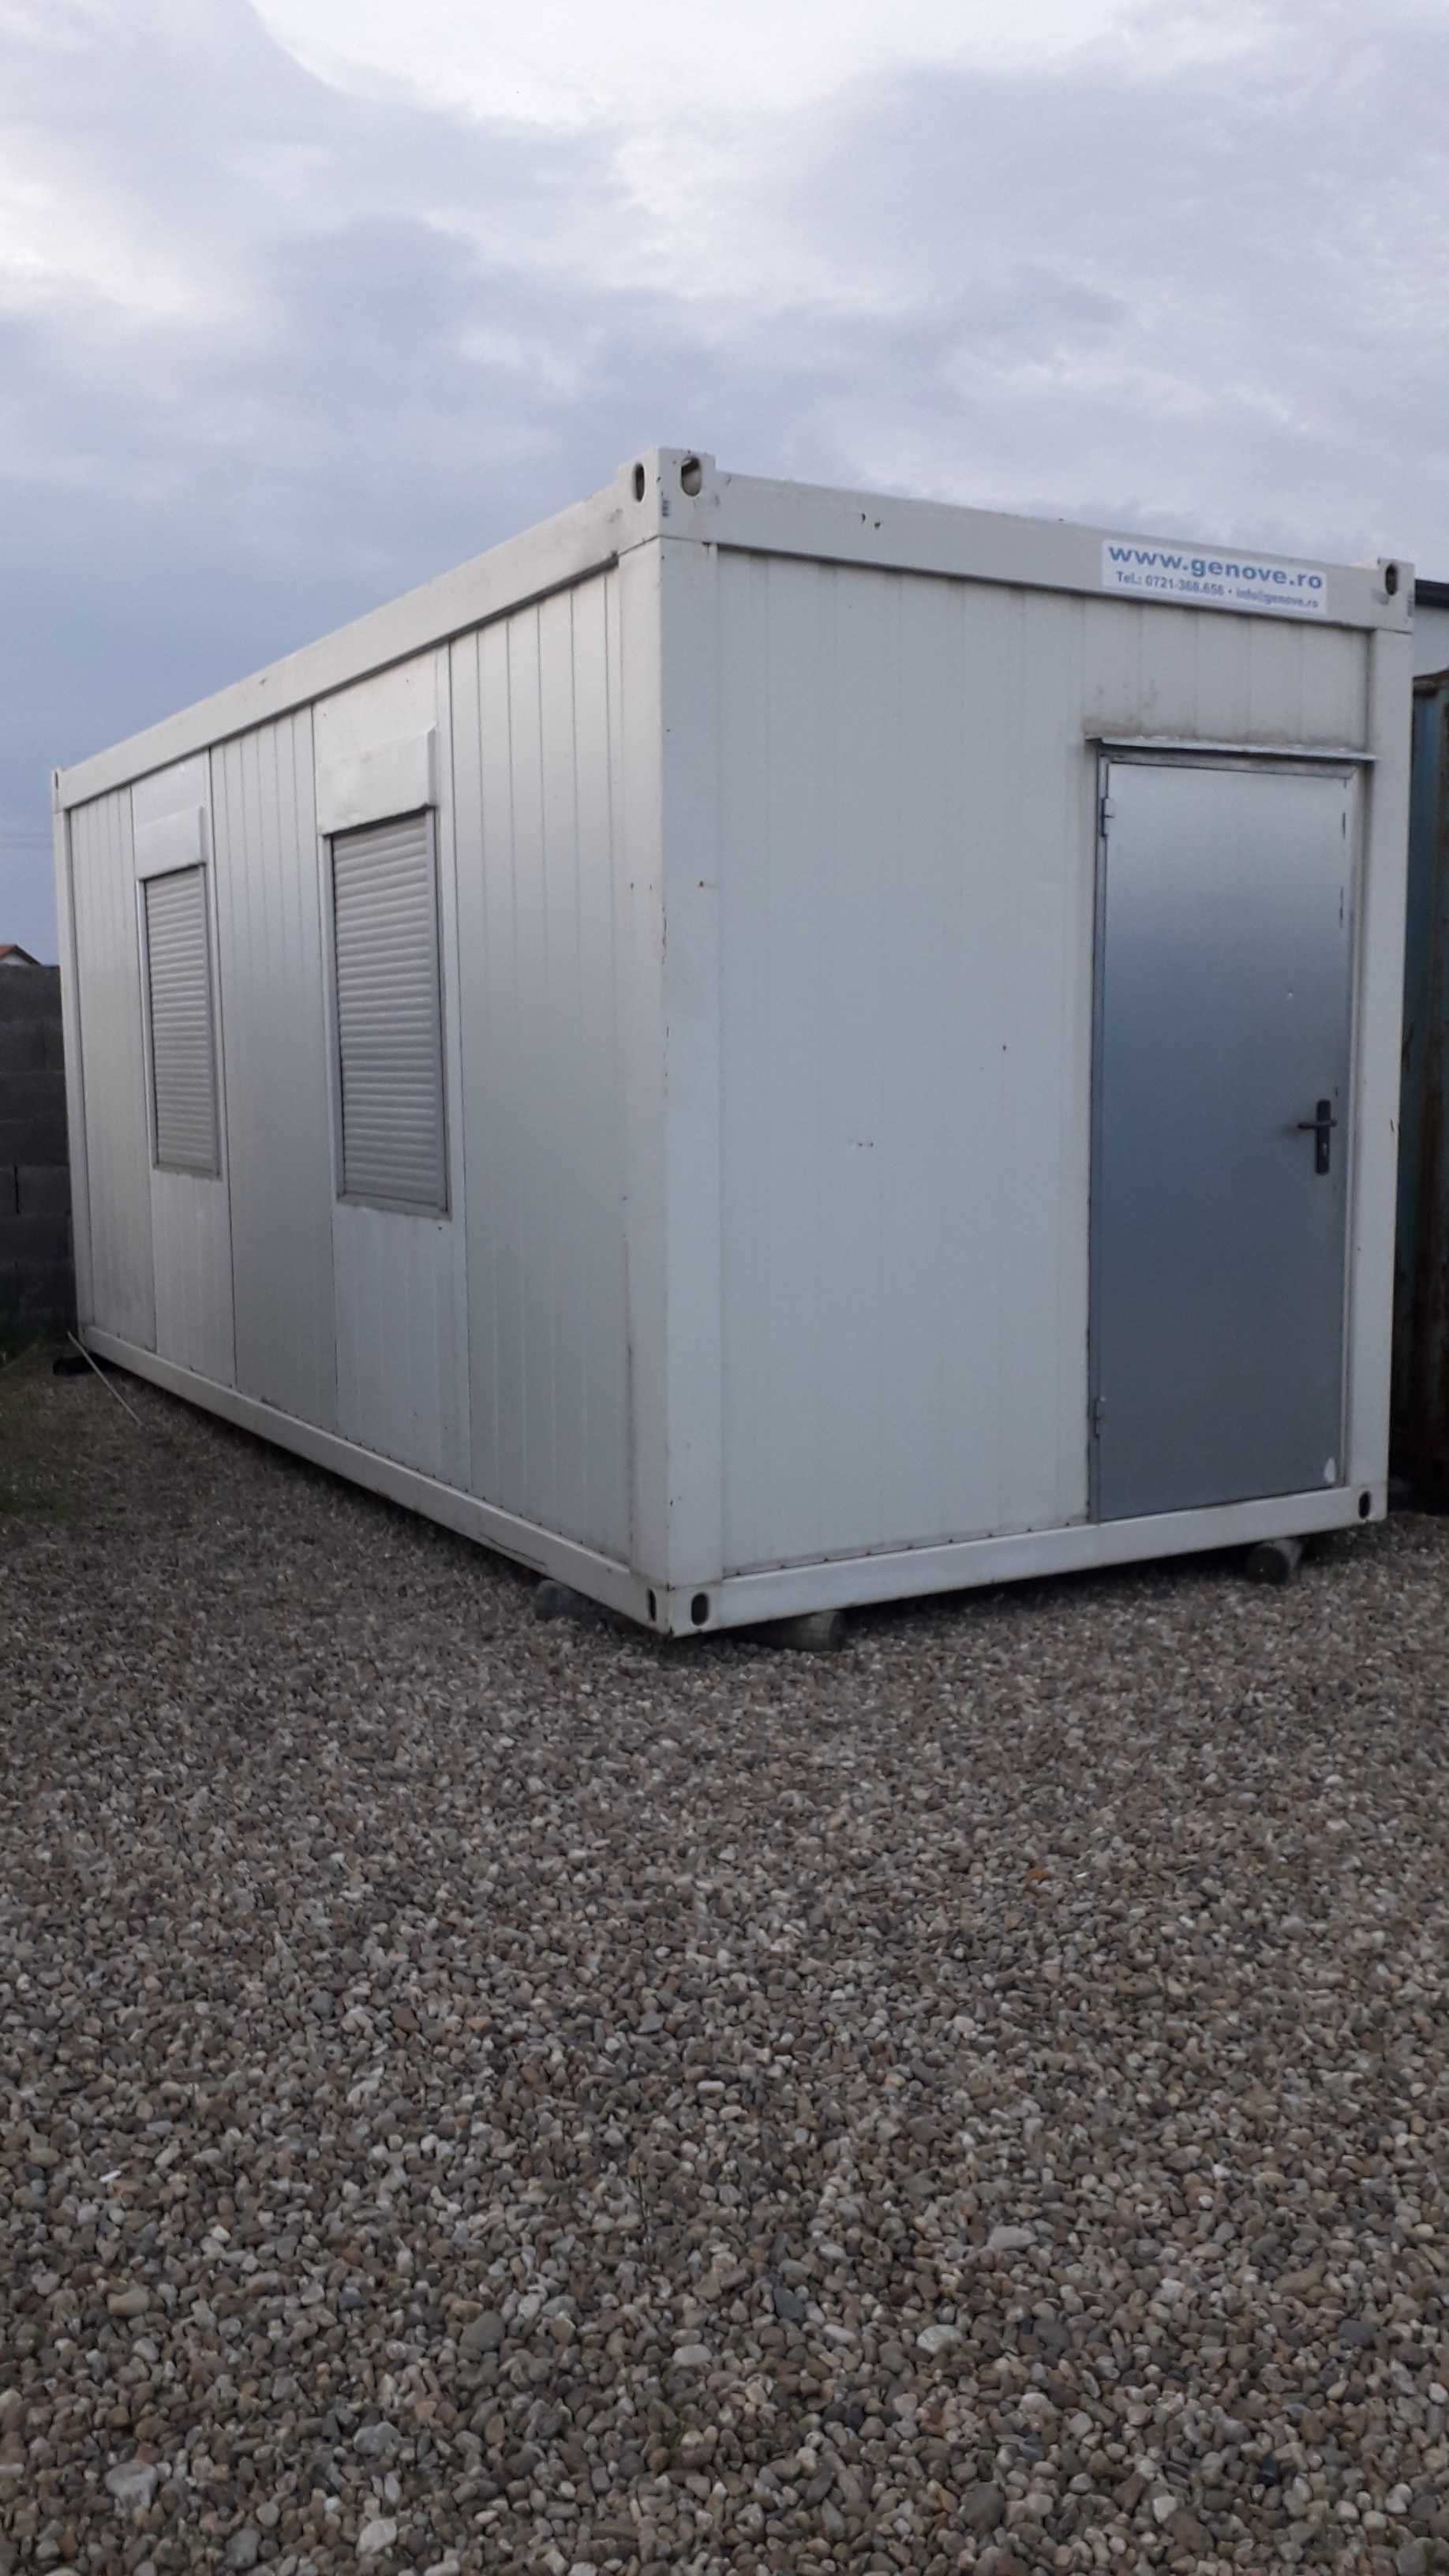 Containere  birou - chirie lunara   (anunt real)